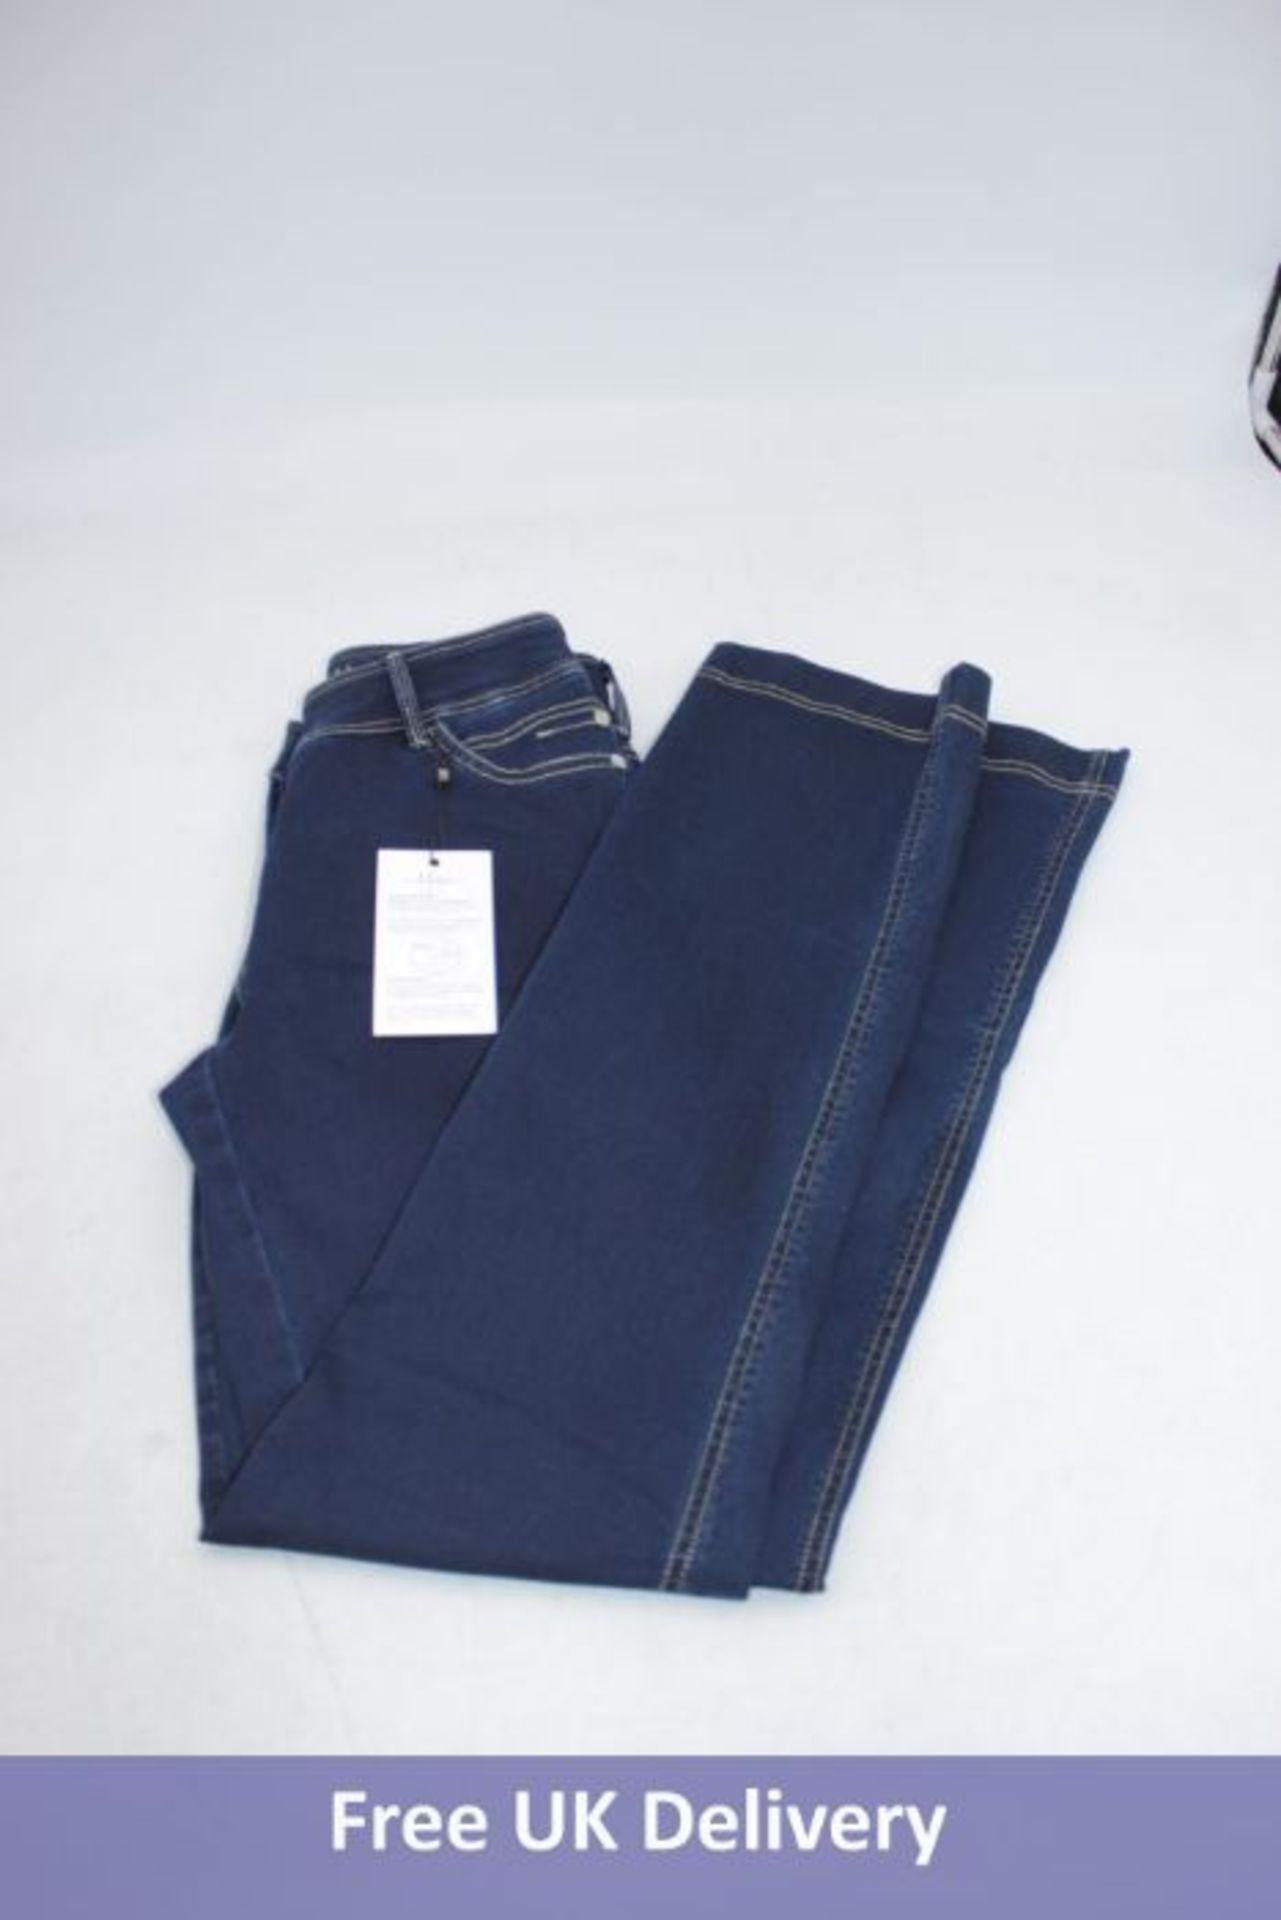 Three items of Michele Women's Clothing to include 1x Maja Denim Jeans, Navy, UK 8 and 1x Flowers Tr